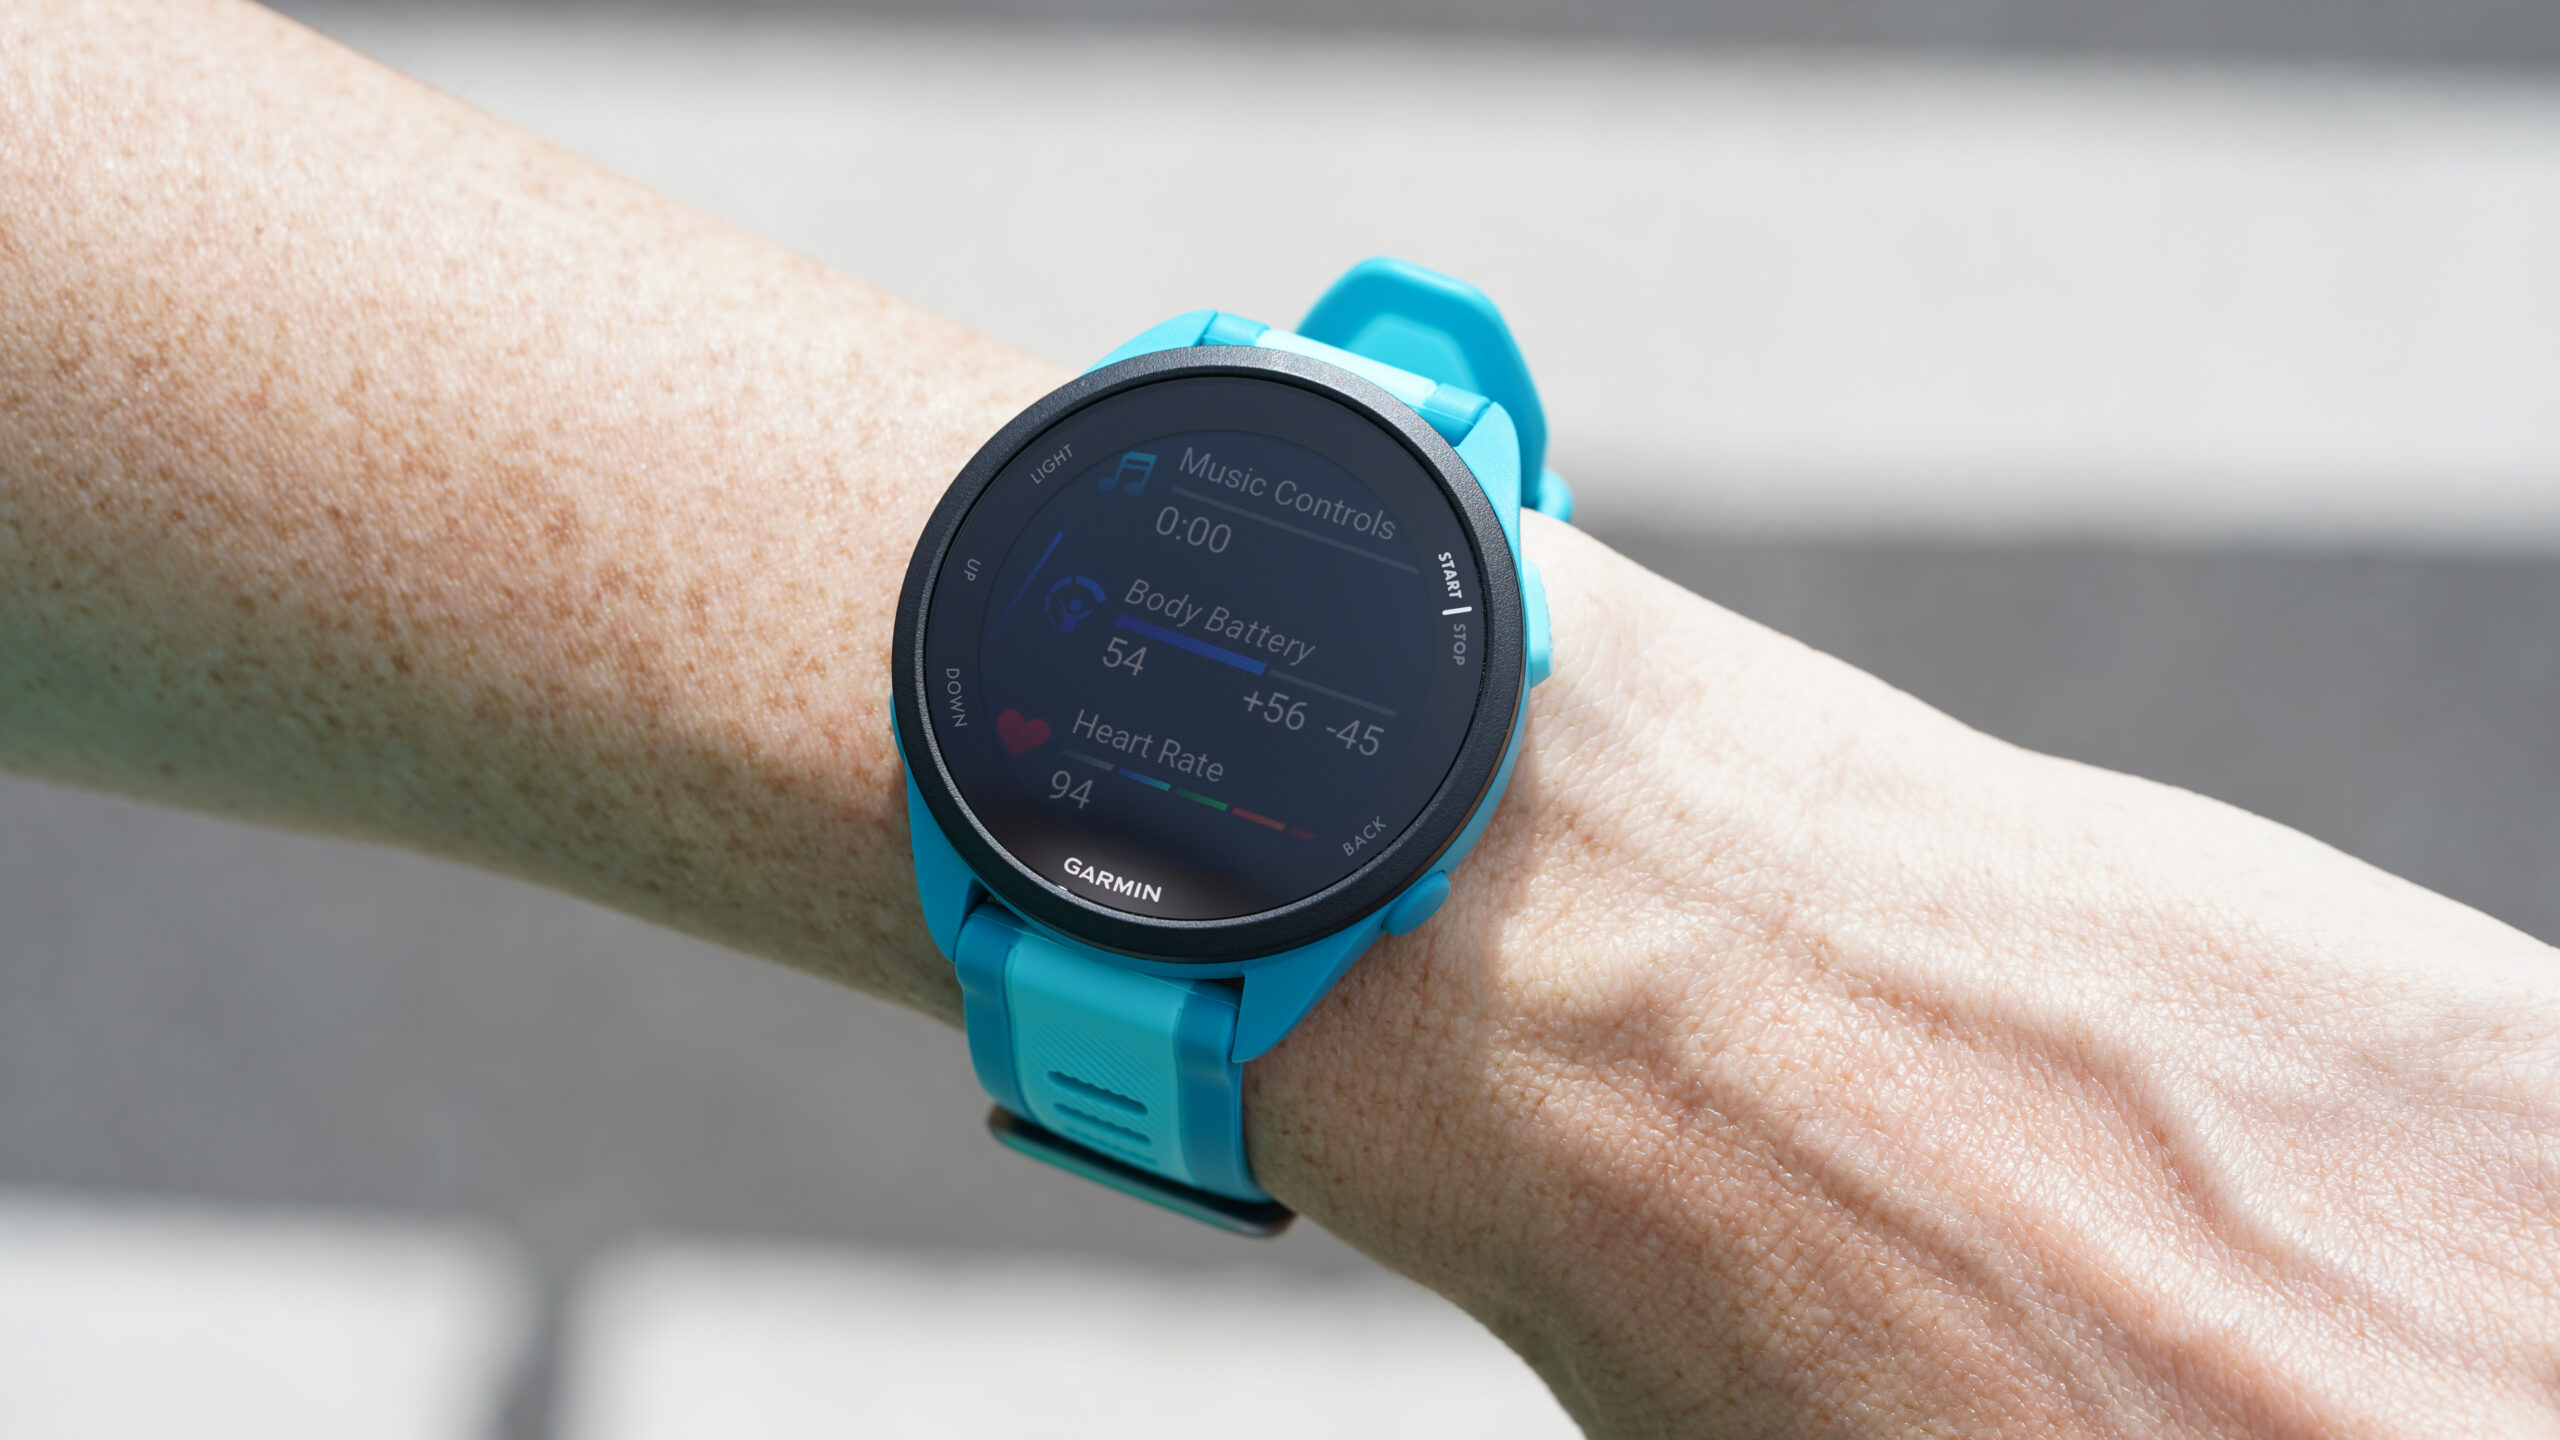 Garmin Forerunner 165 review: Should you buy it? - Android Authority